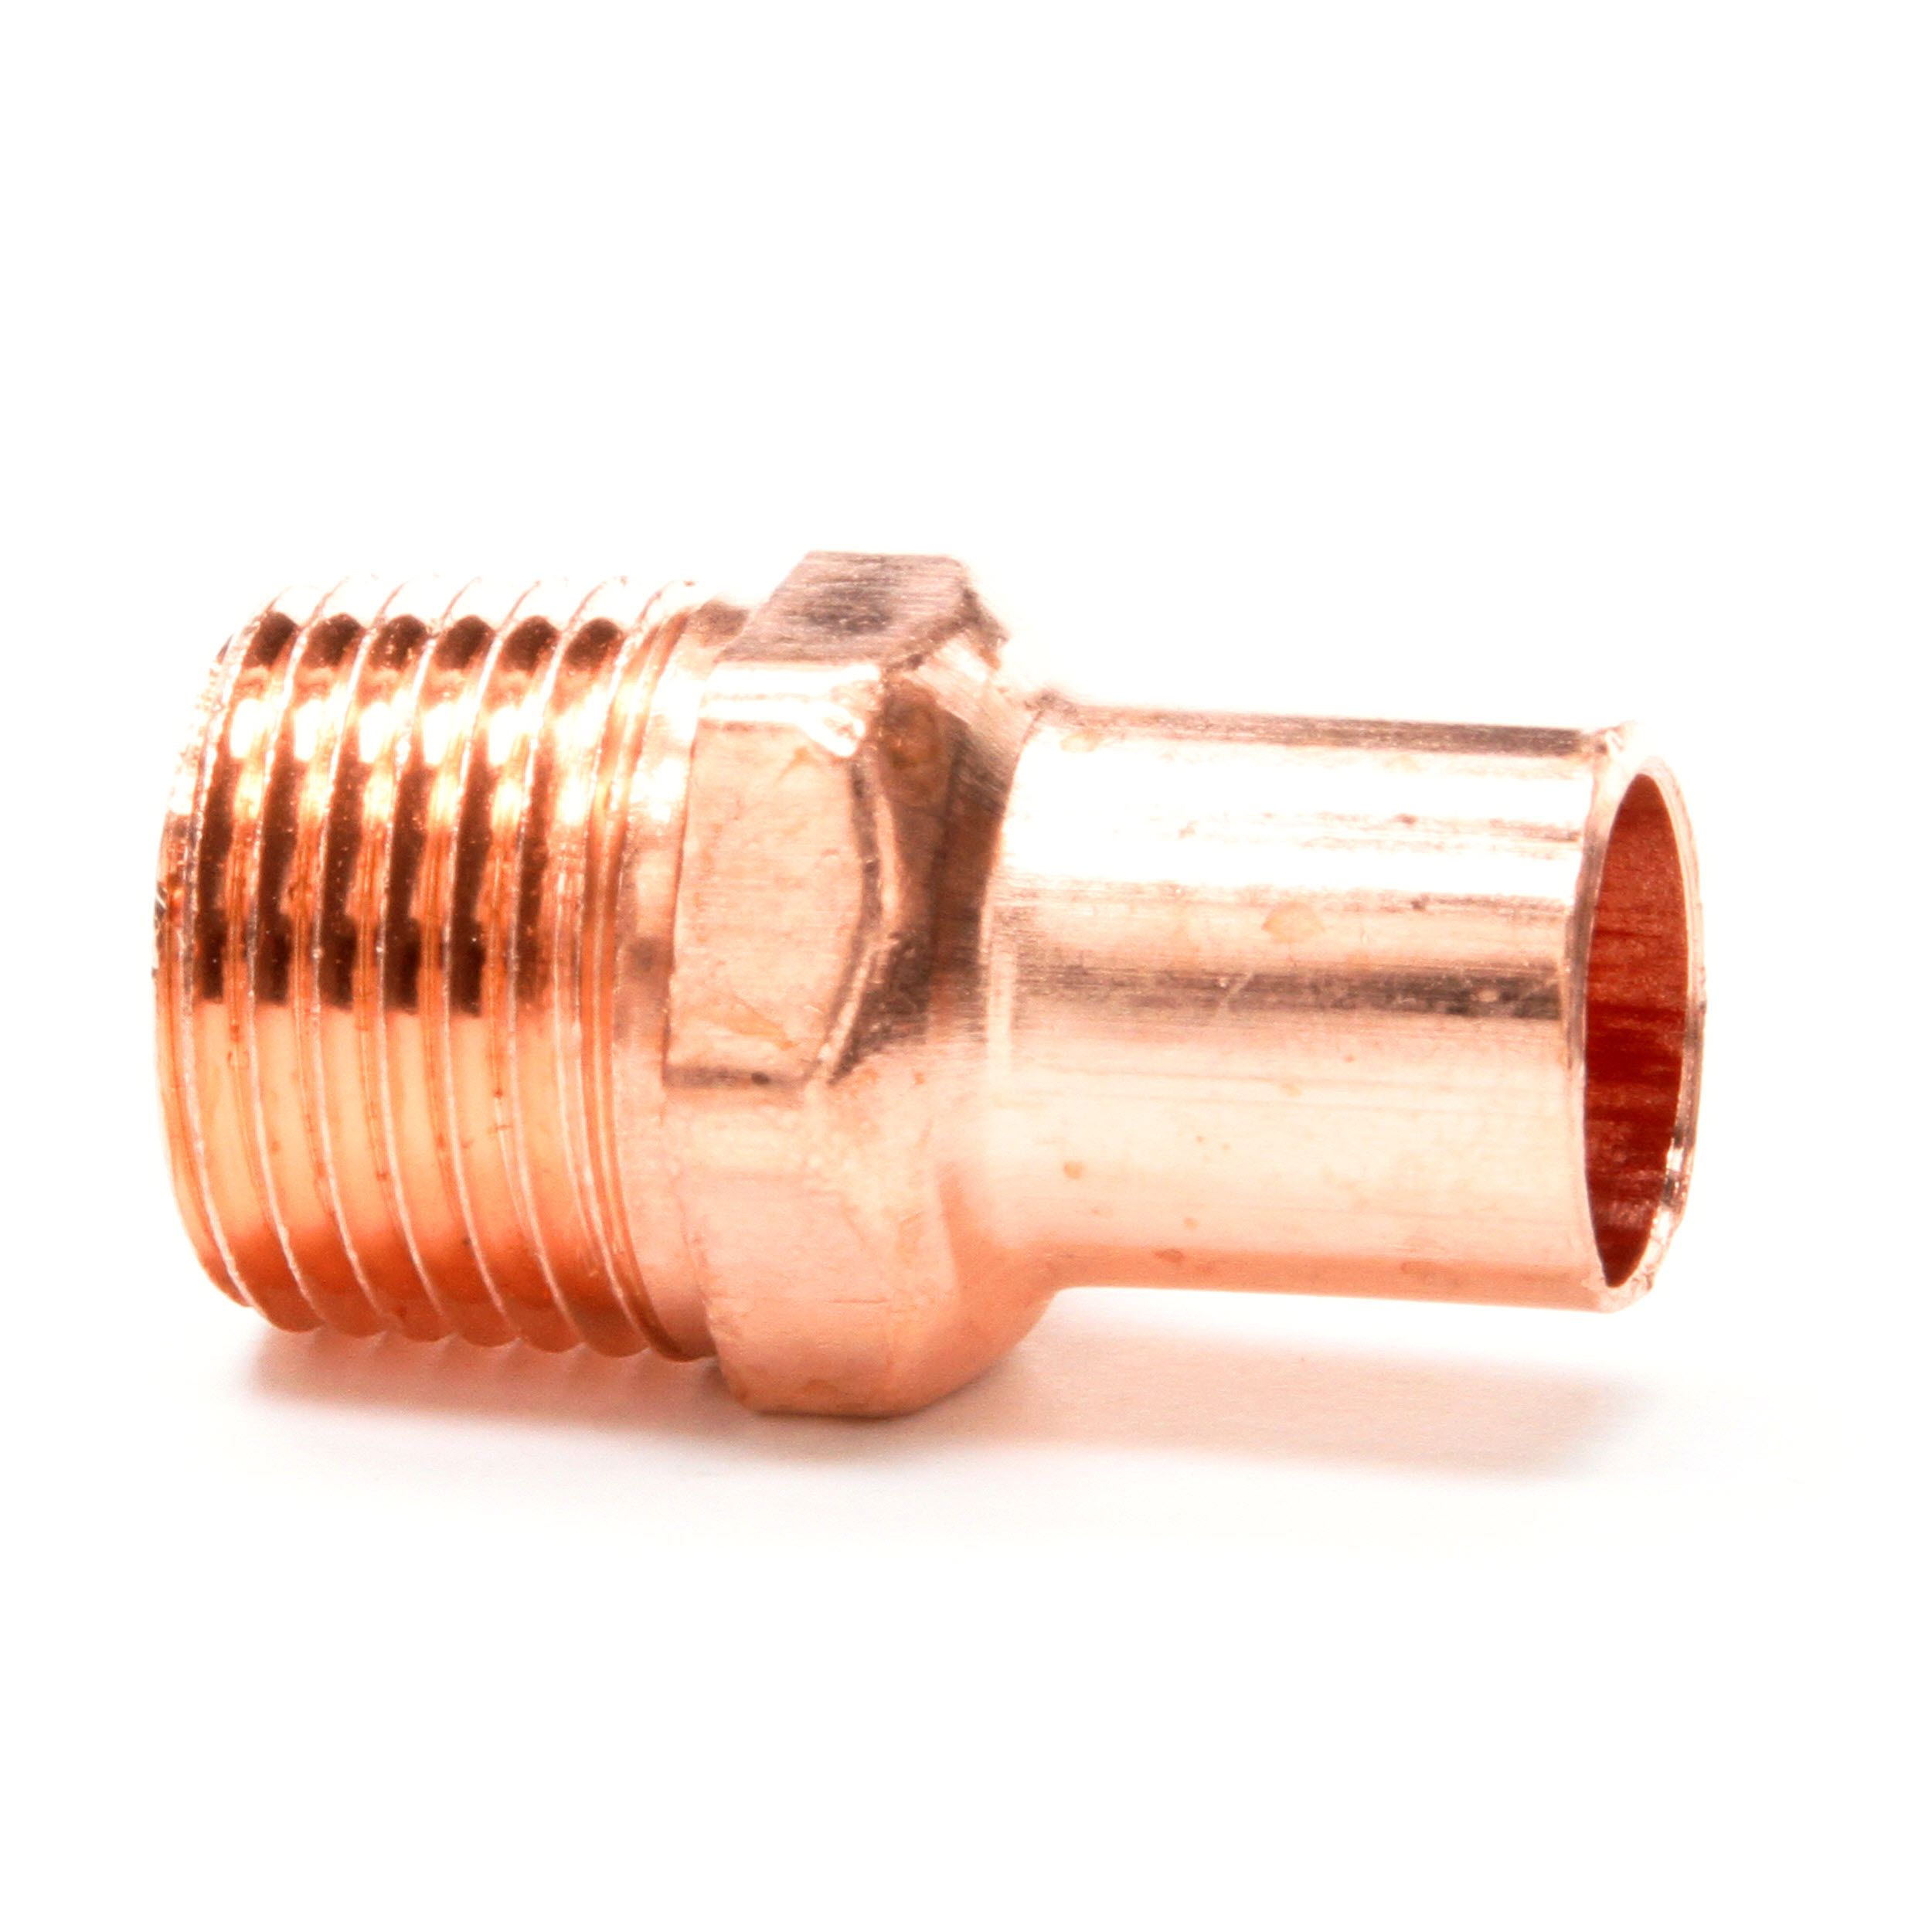 Wrot Copper 1/2" Solder F X 1/2" Fitting Male Reducing Street Adapter 5 Pack 